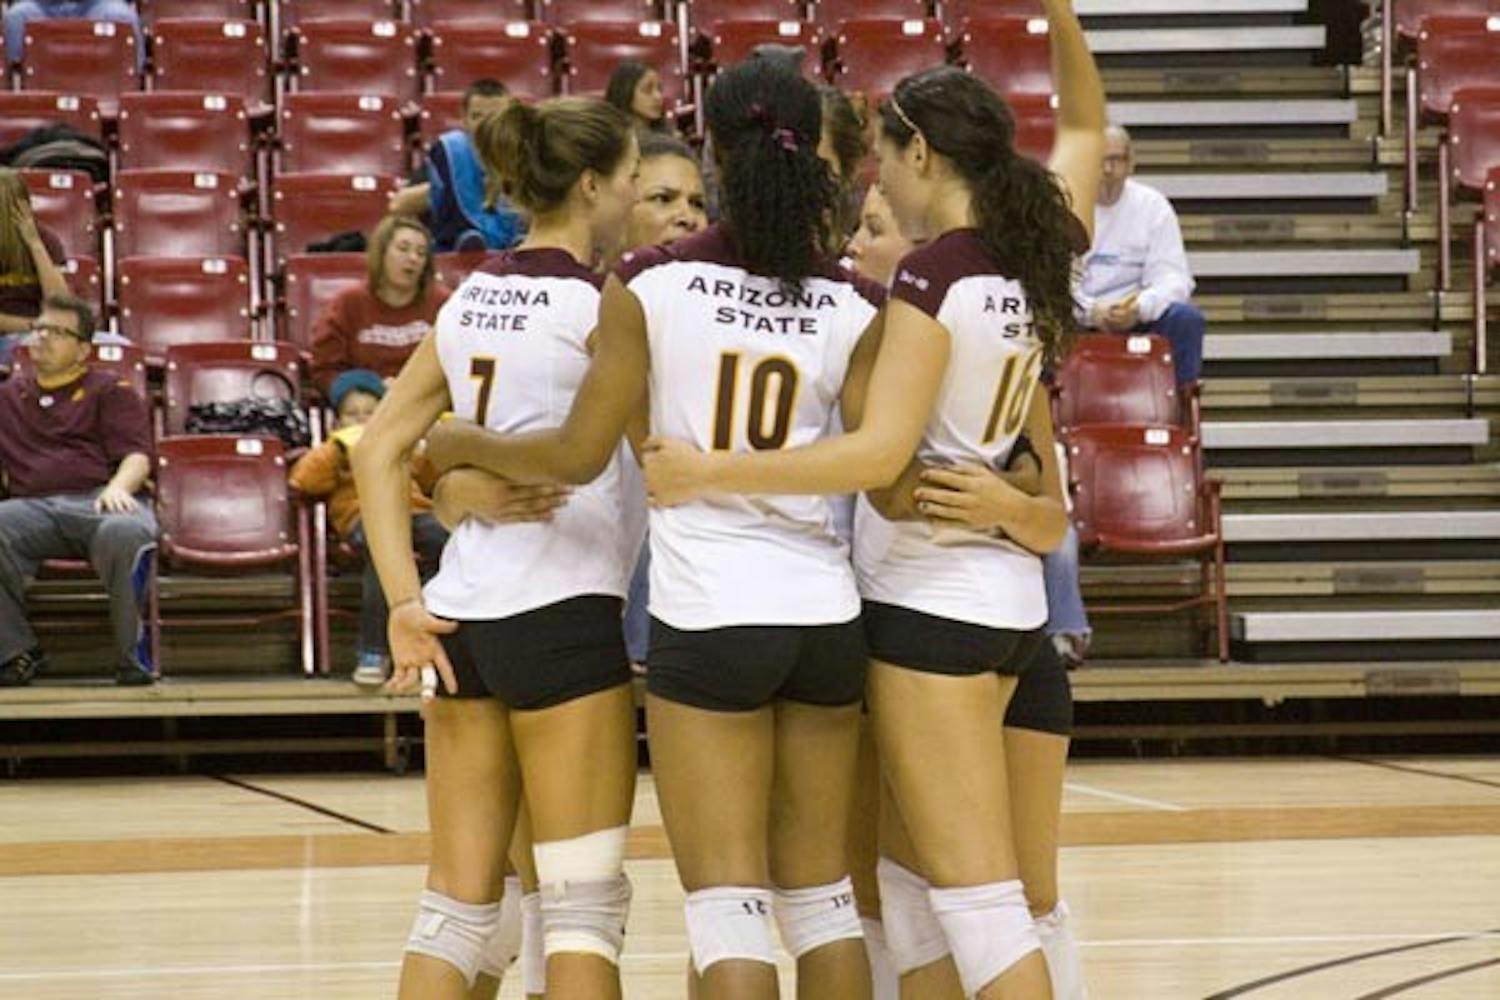 SLOW RISE: After a stretch of tough years devoid of postseason play, ASU women’s volleyball coach Jason Watson believes his team is on the rise. The team went 7-11 in conference play this season after winning just three Pac-10 matches last year. (Photo by Annie Wechter)